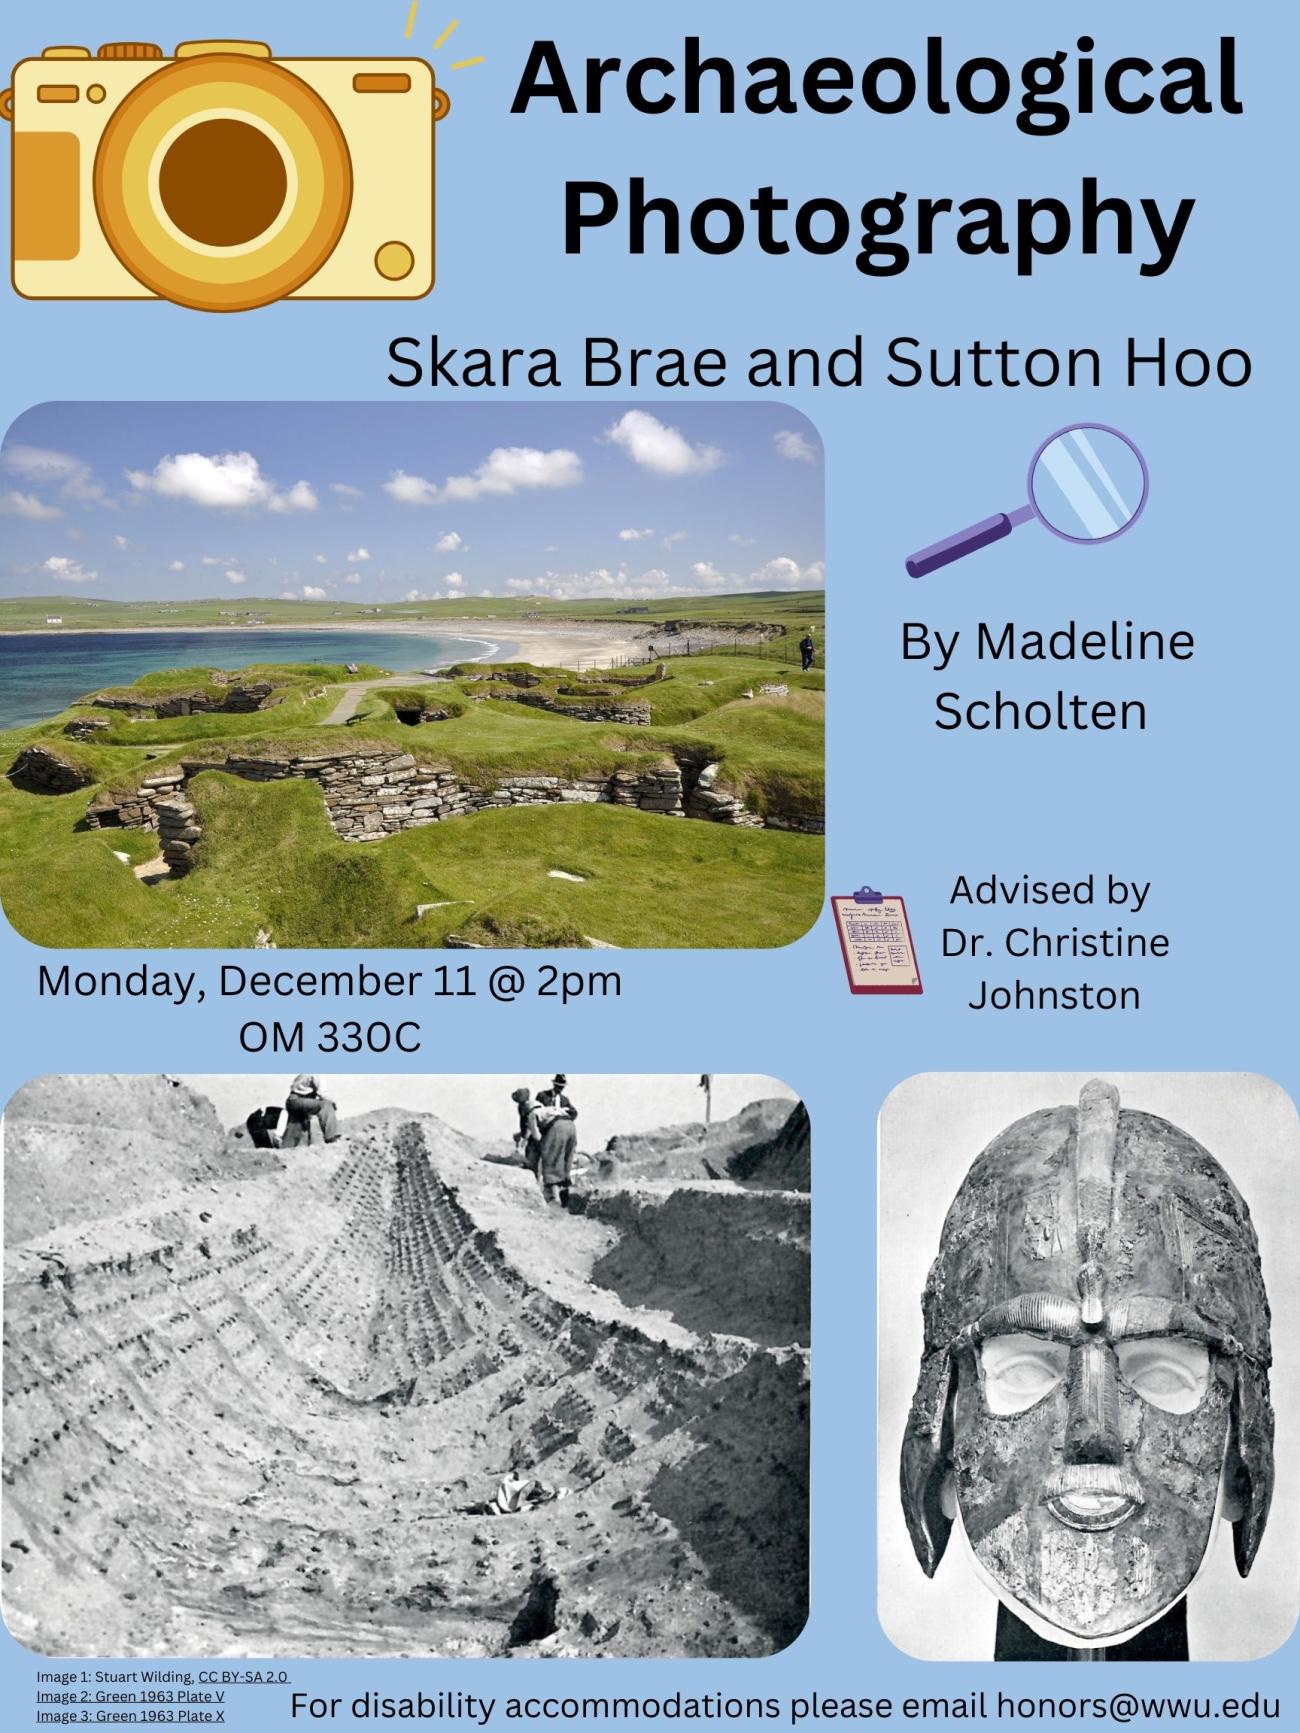 The center of the poster is an image of the archaeological site Skara Brae; blue sky and grass covered stone walls with a white sandy beach. Other images are from Sutton Hoo. They are black & white; depicting the forward-facing view of a ship imprinted in a hole in the ground with workers in the back. The second image shows a helmet displayed forward facing. Text reads “Archaeological Photography: Skara Brae and Sutton Hoo. By Madeline Scholten, advised by Christine Johnston.